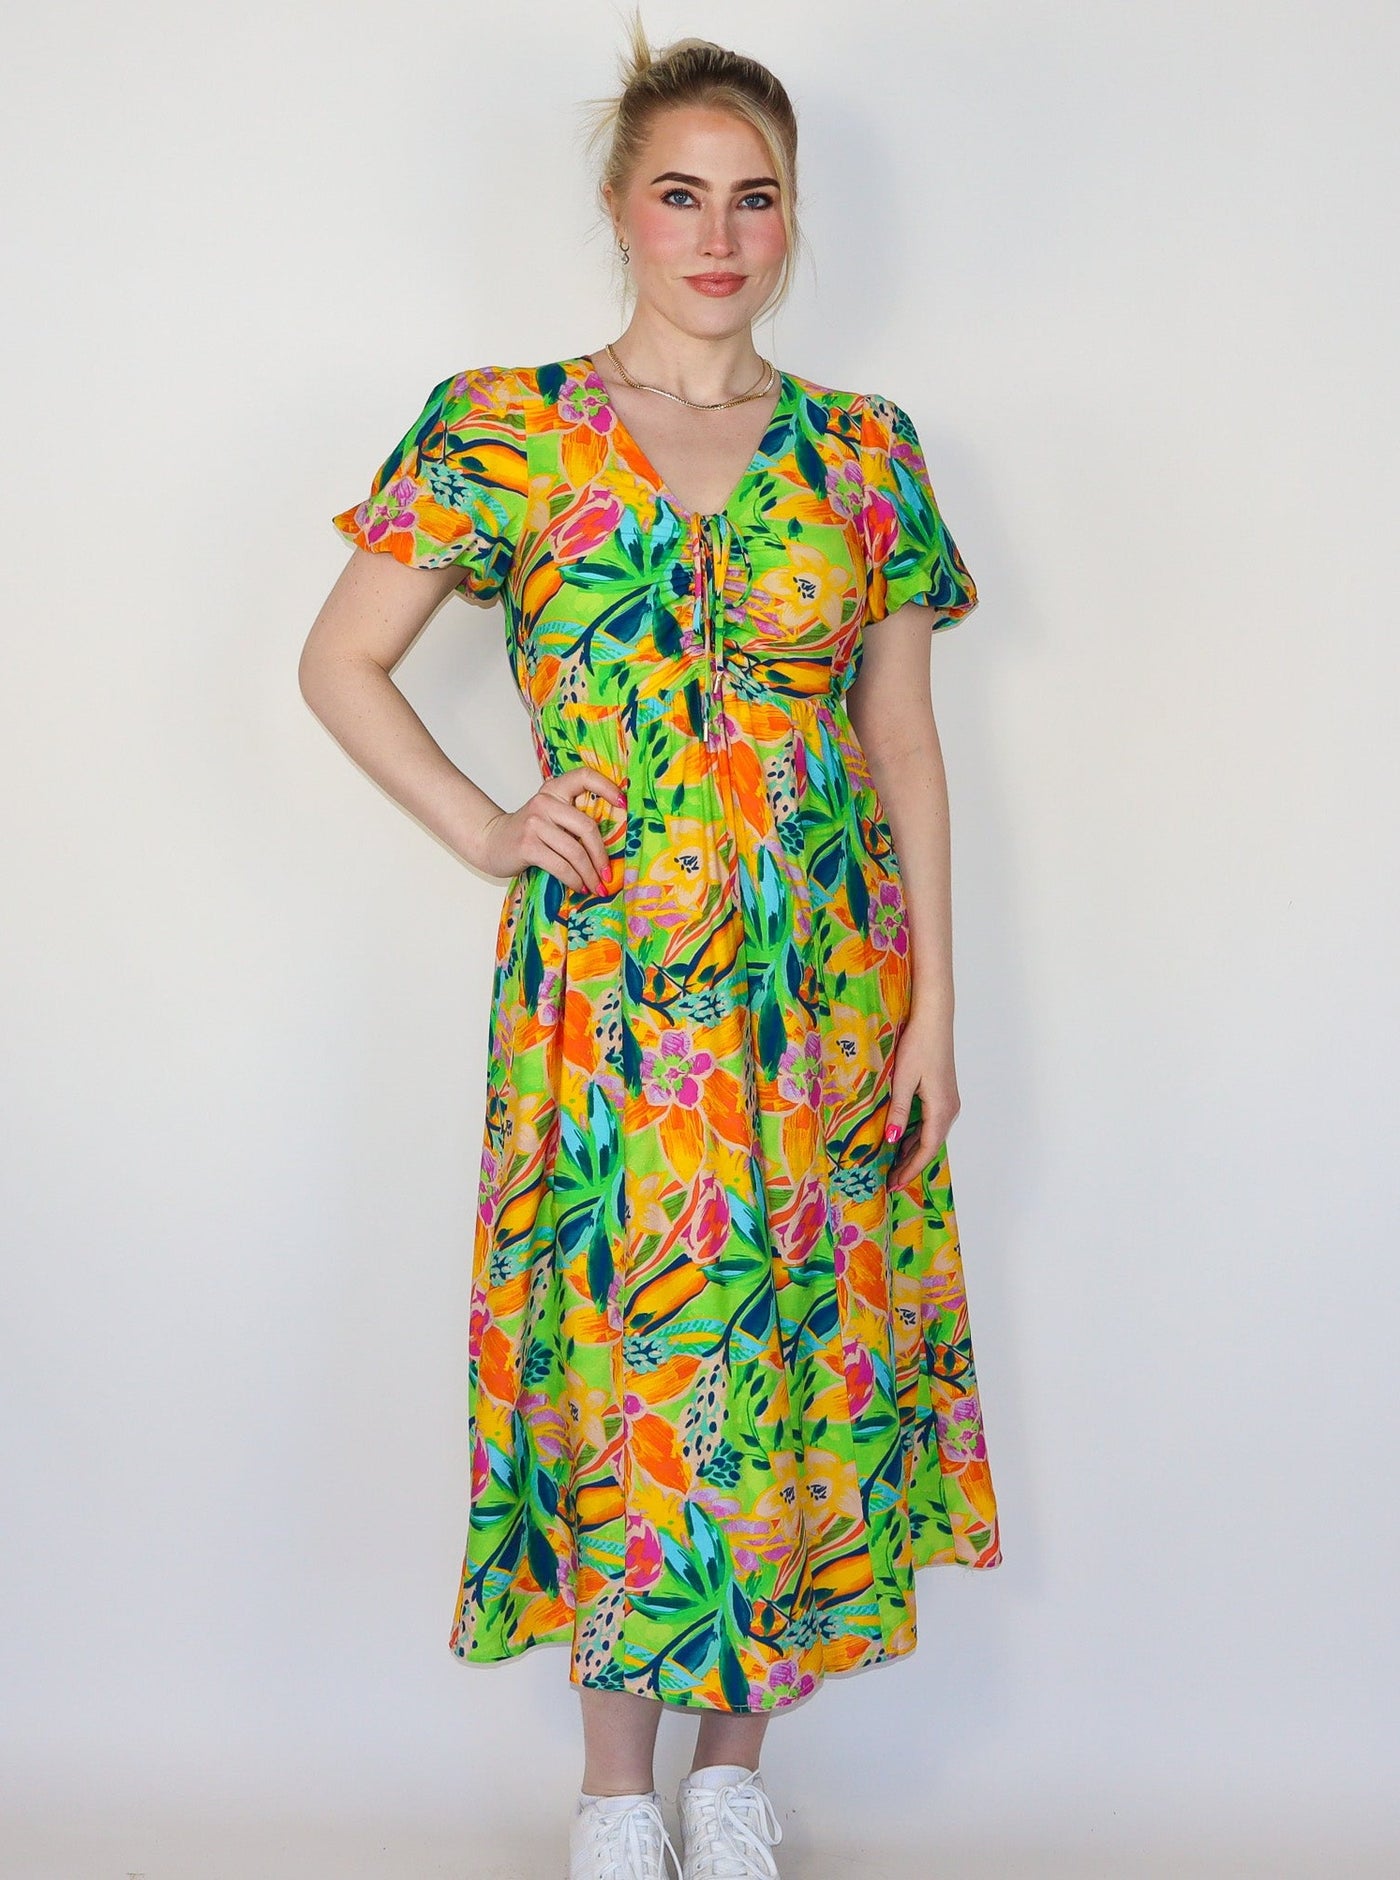 Model is wearing a flowy multi colored midi dress with puffy sleeves, a vneck, and string detail on the neckline. Dress is paired with white tennis shoes. 